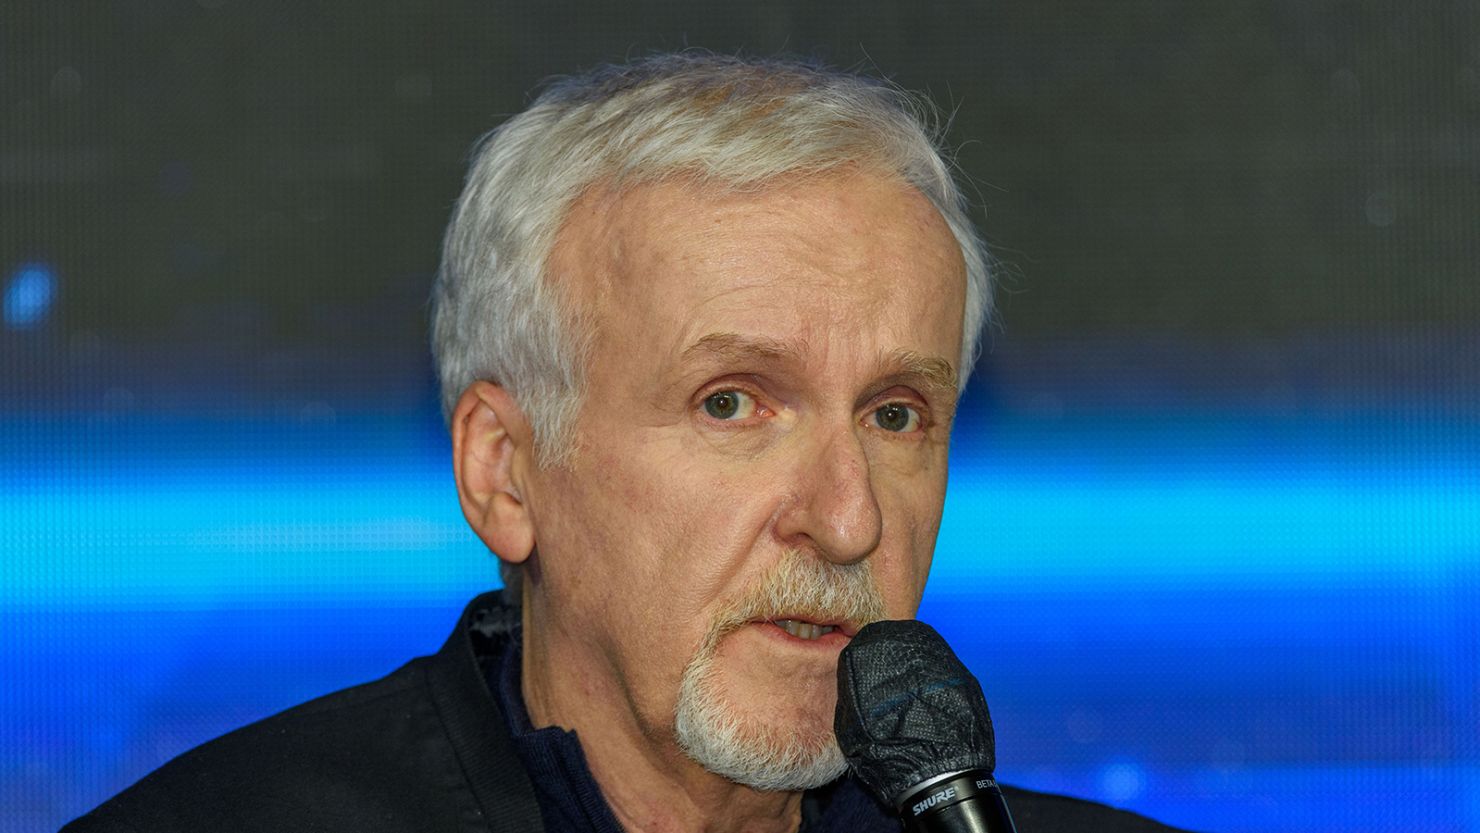 James Cameron, seen here in Seoul on December 9, will miss the Los Angeles premiere of 'Avatar: The Way of Water' after testing positive for Covid-19.